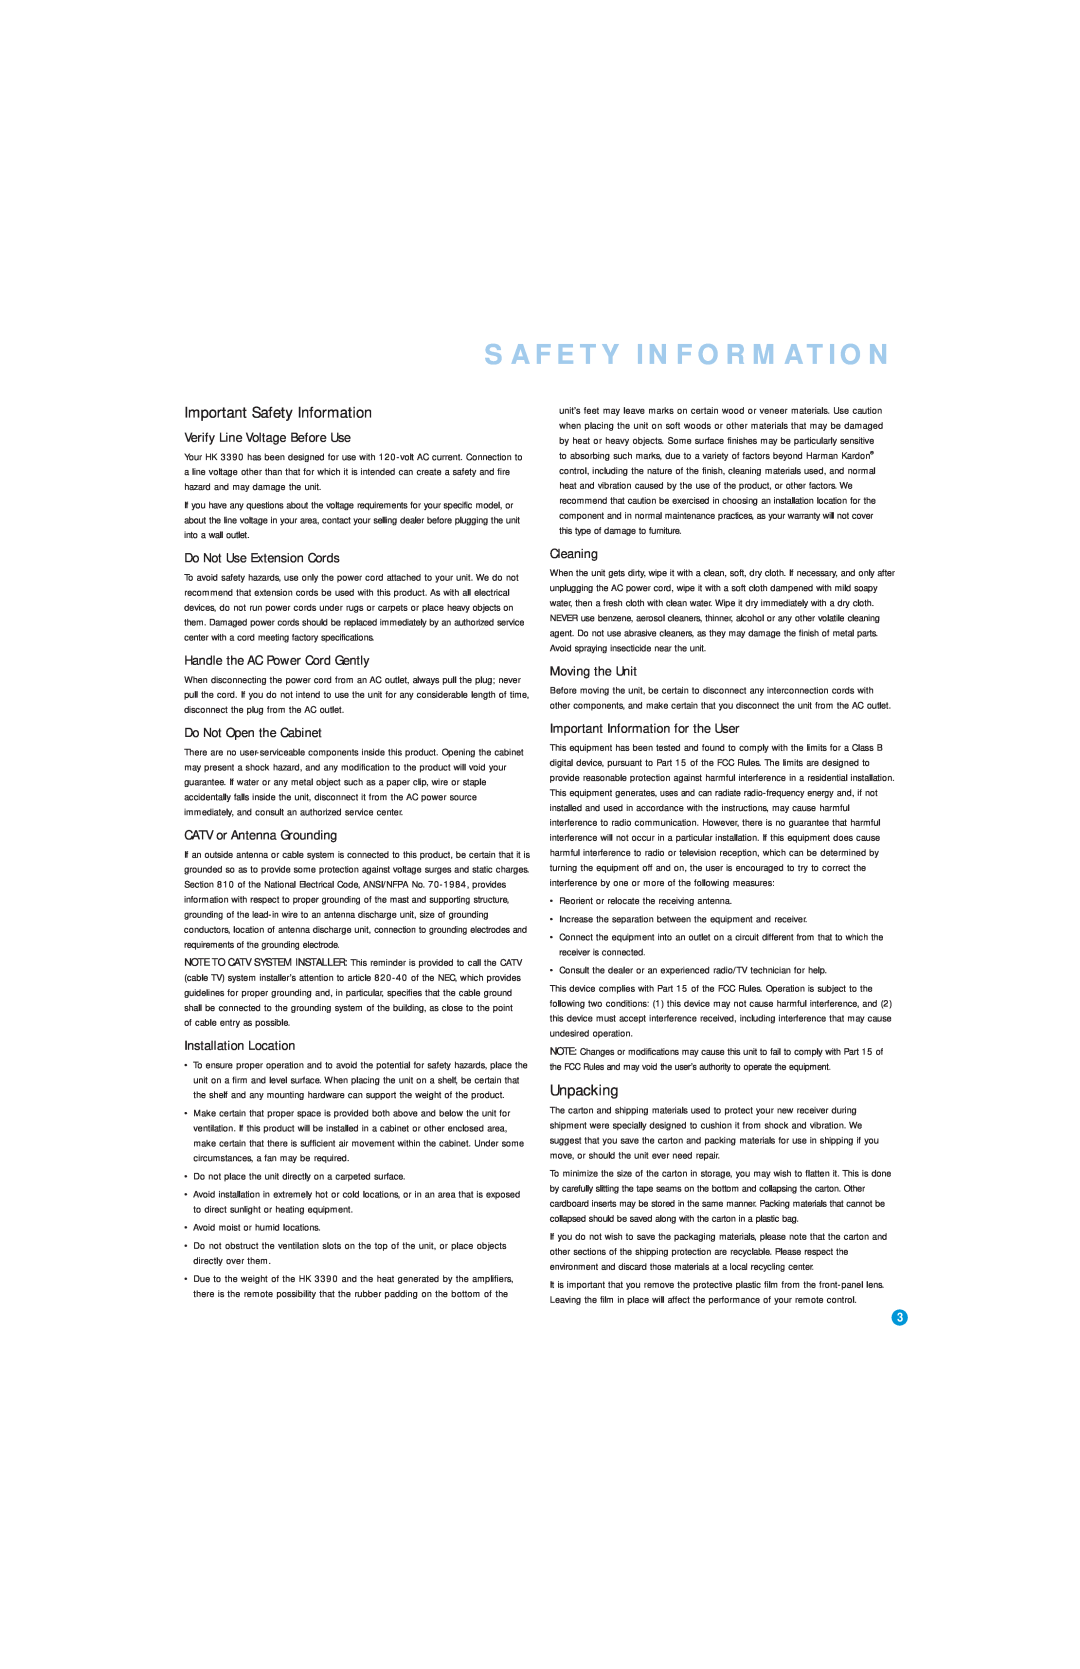 Harman-Kardon HK 3390 Important Safety Information, Unpacking, Verify Line Voltage Before Use, Do Not Use Extension Cords 